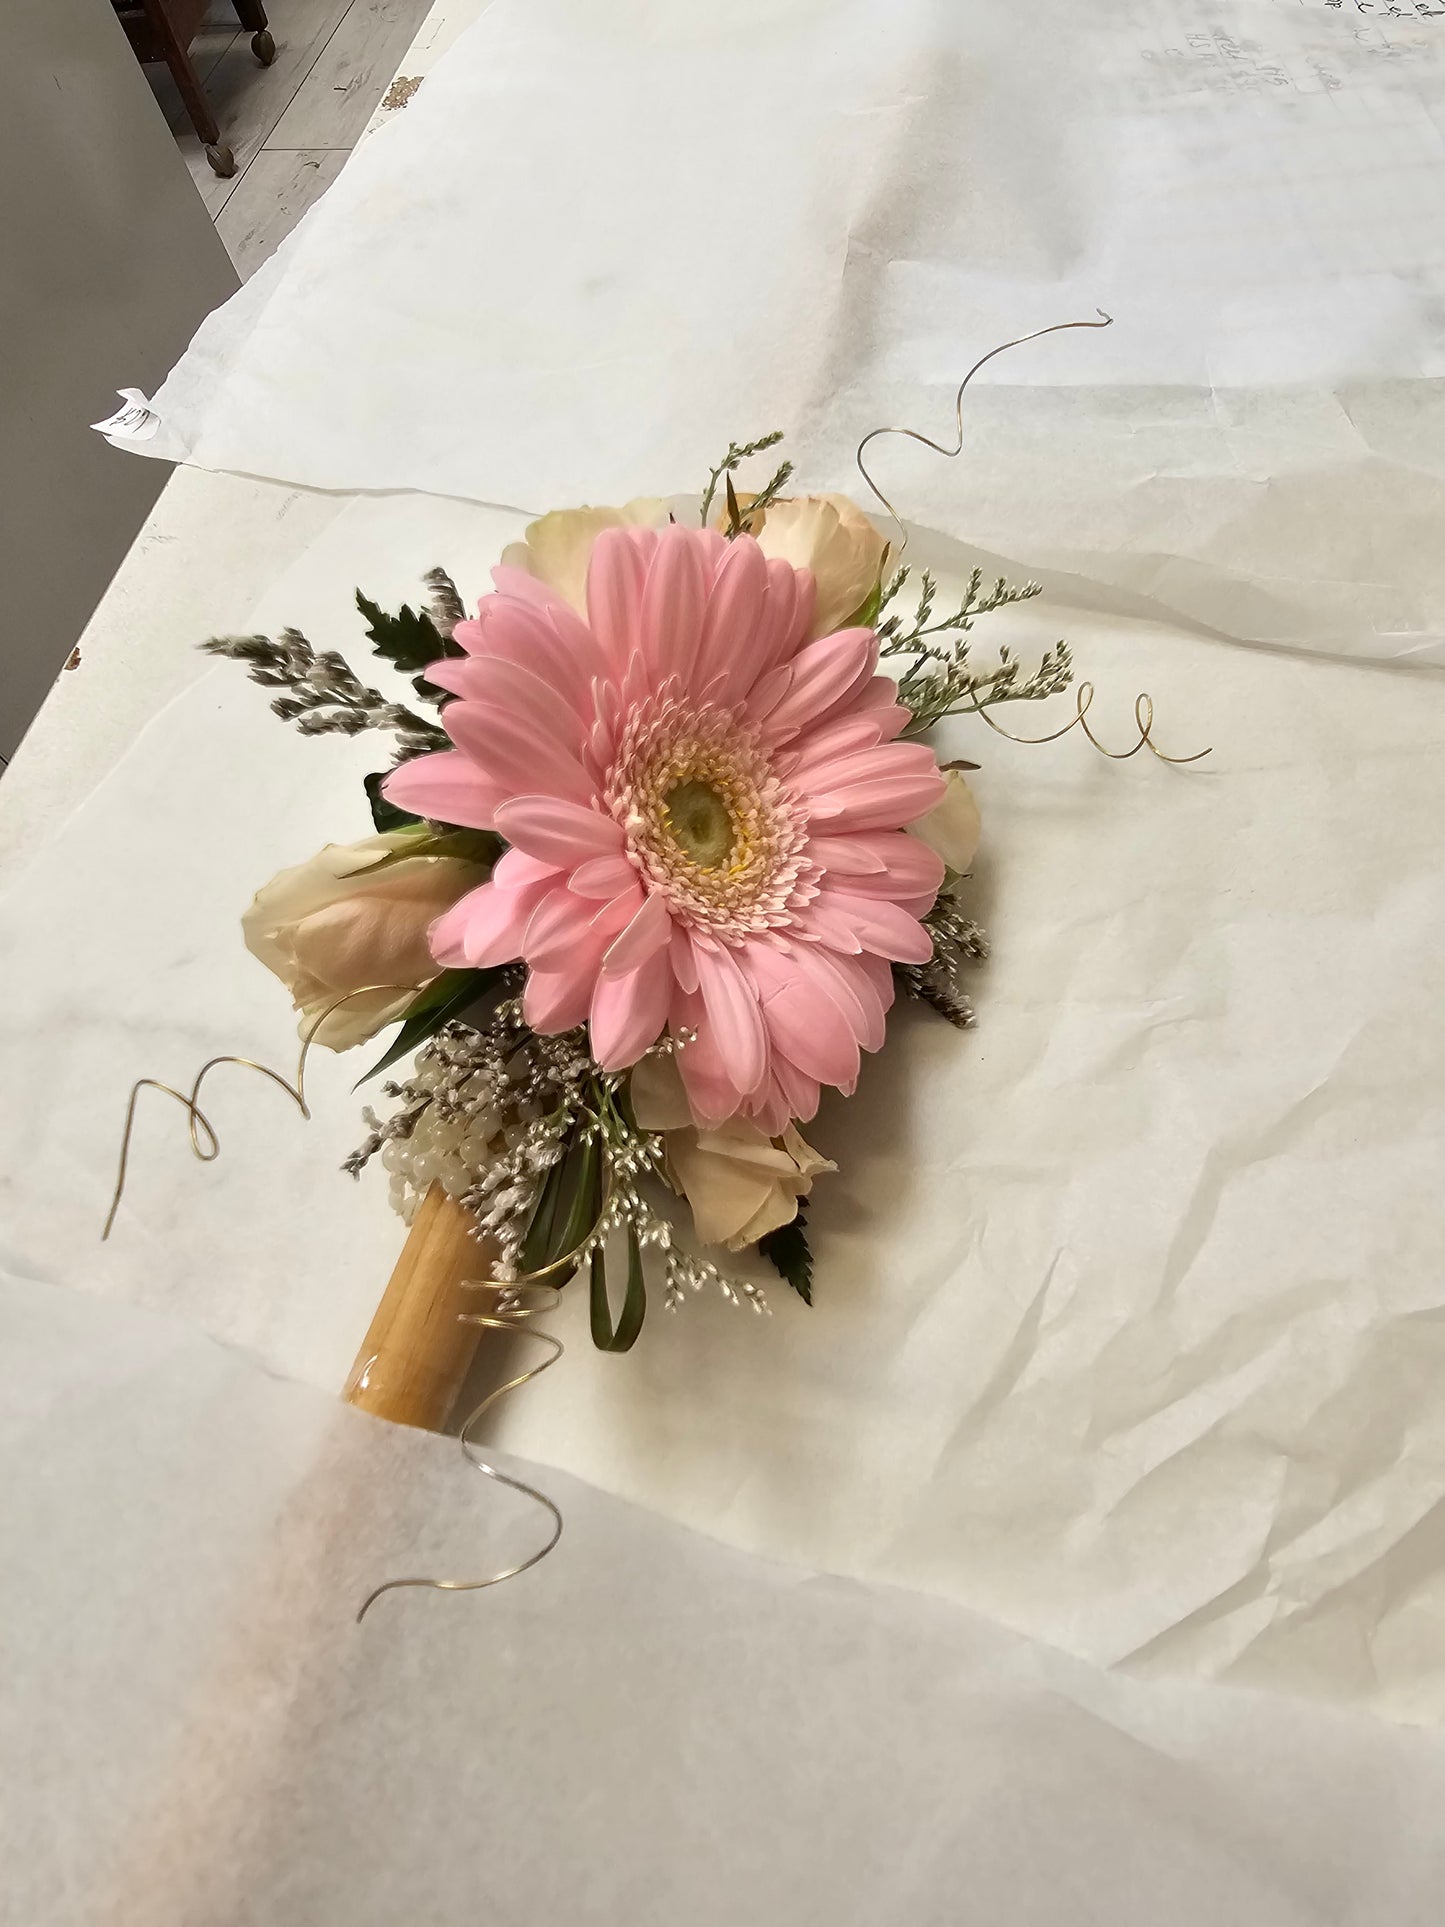 Wedding or Ball, Wrist Corsages - Broadfield Flowers Florist Lincoln